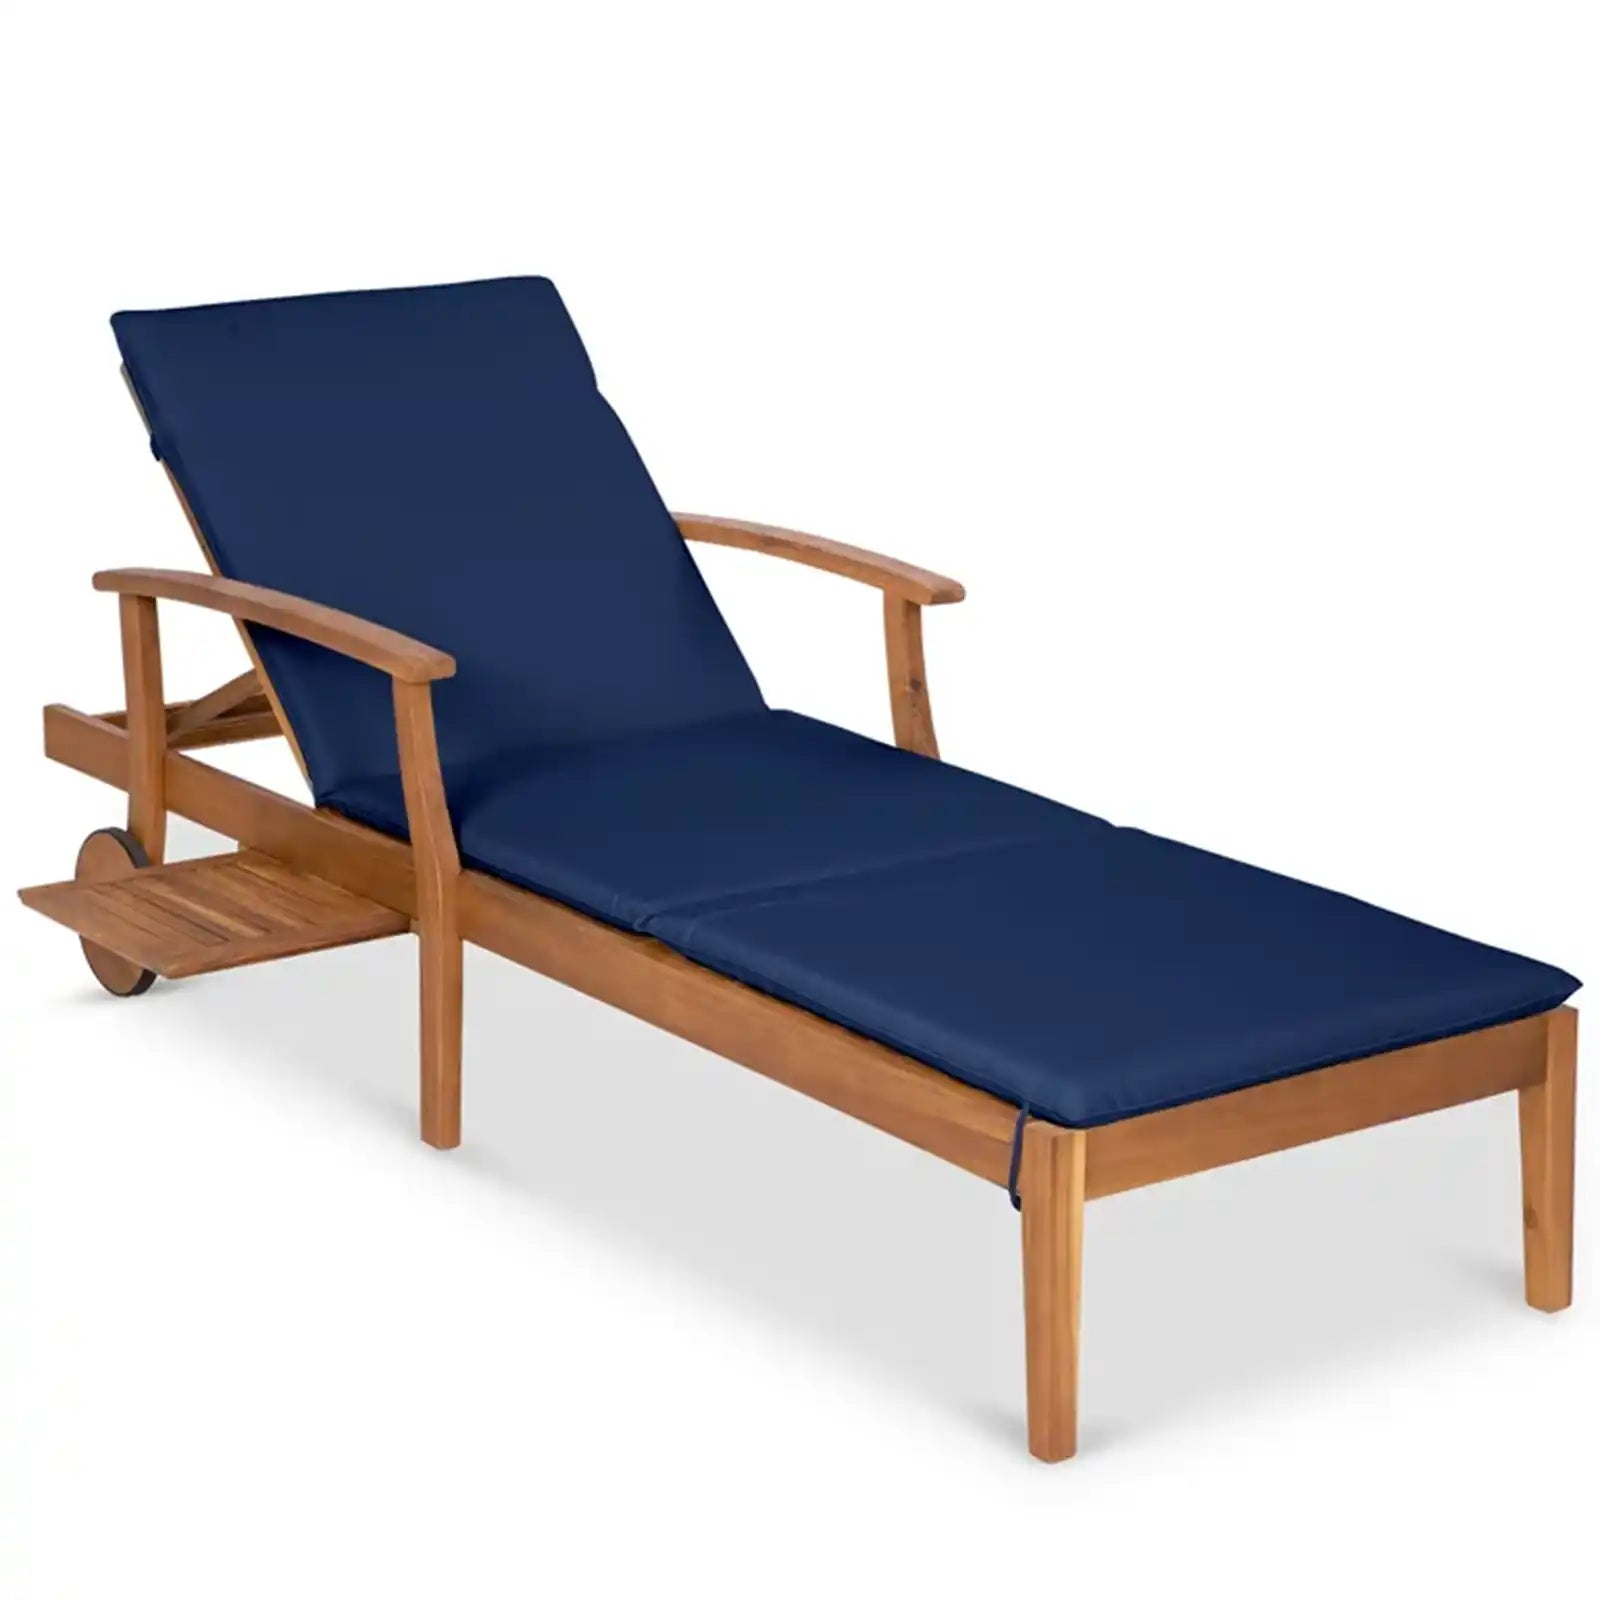 Acacia Wood Outdoor Chaise Lounge Chair w/ Adjustable Backrest, Table, Wheels